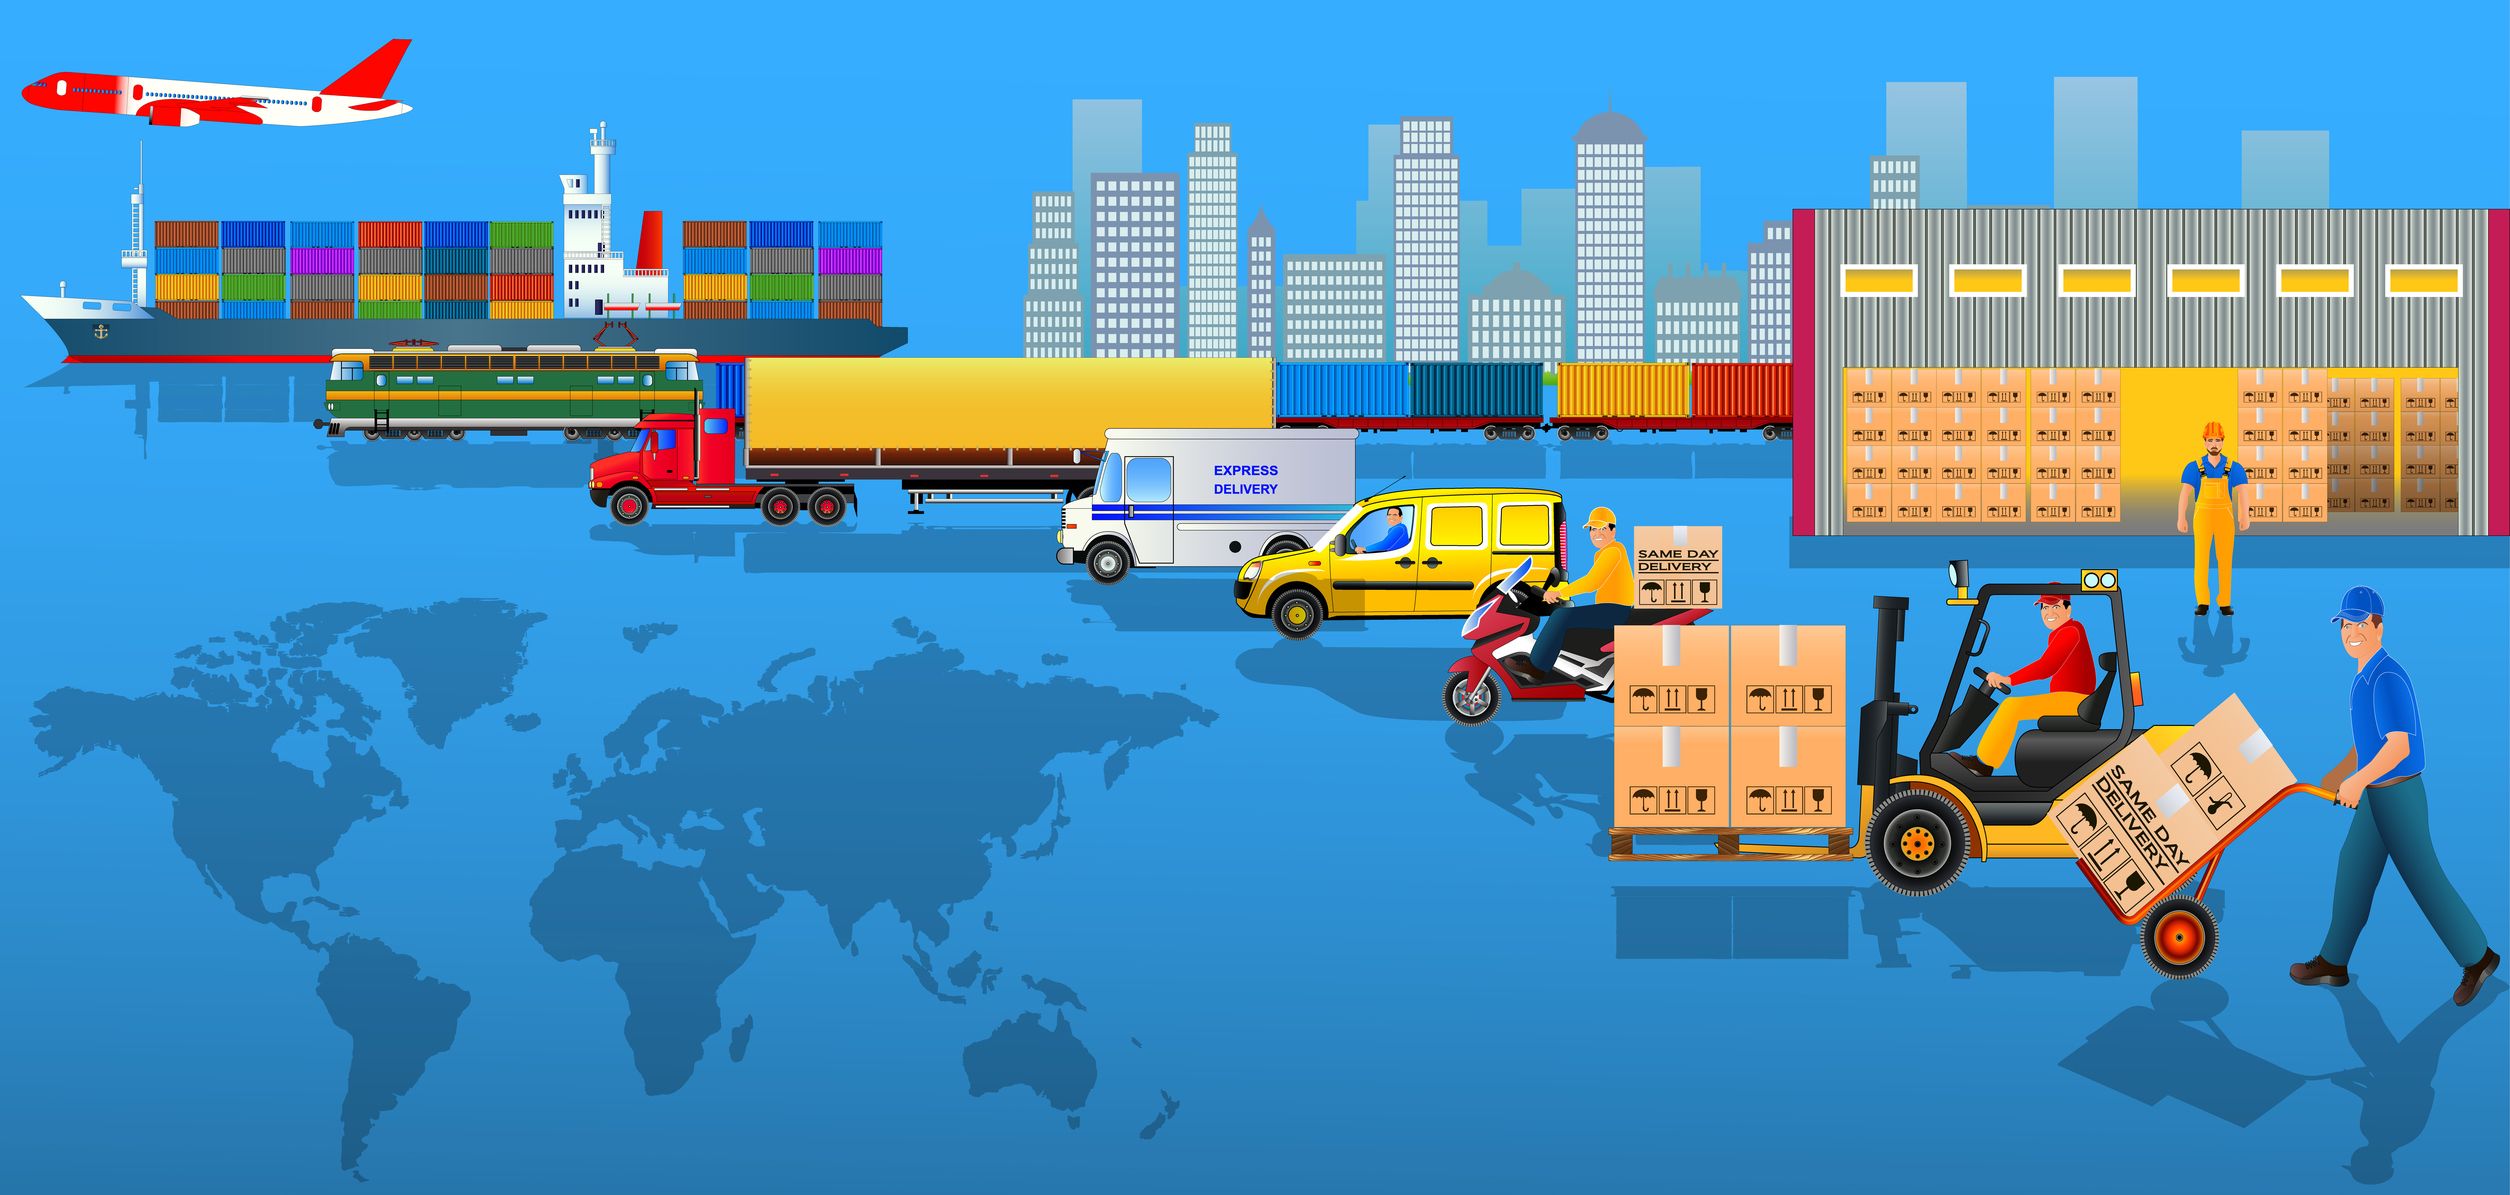 How Importing and Exporting Impacts the Economy